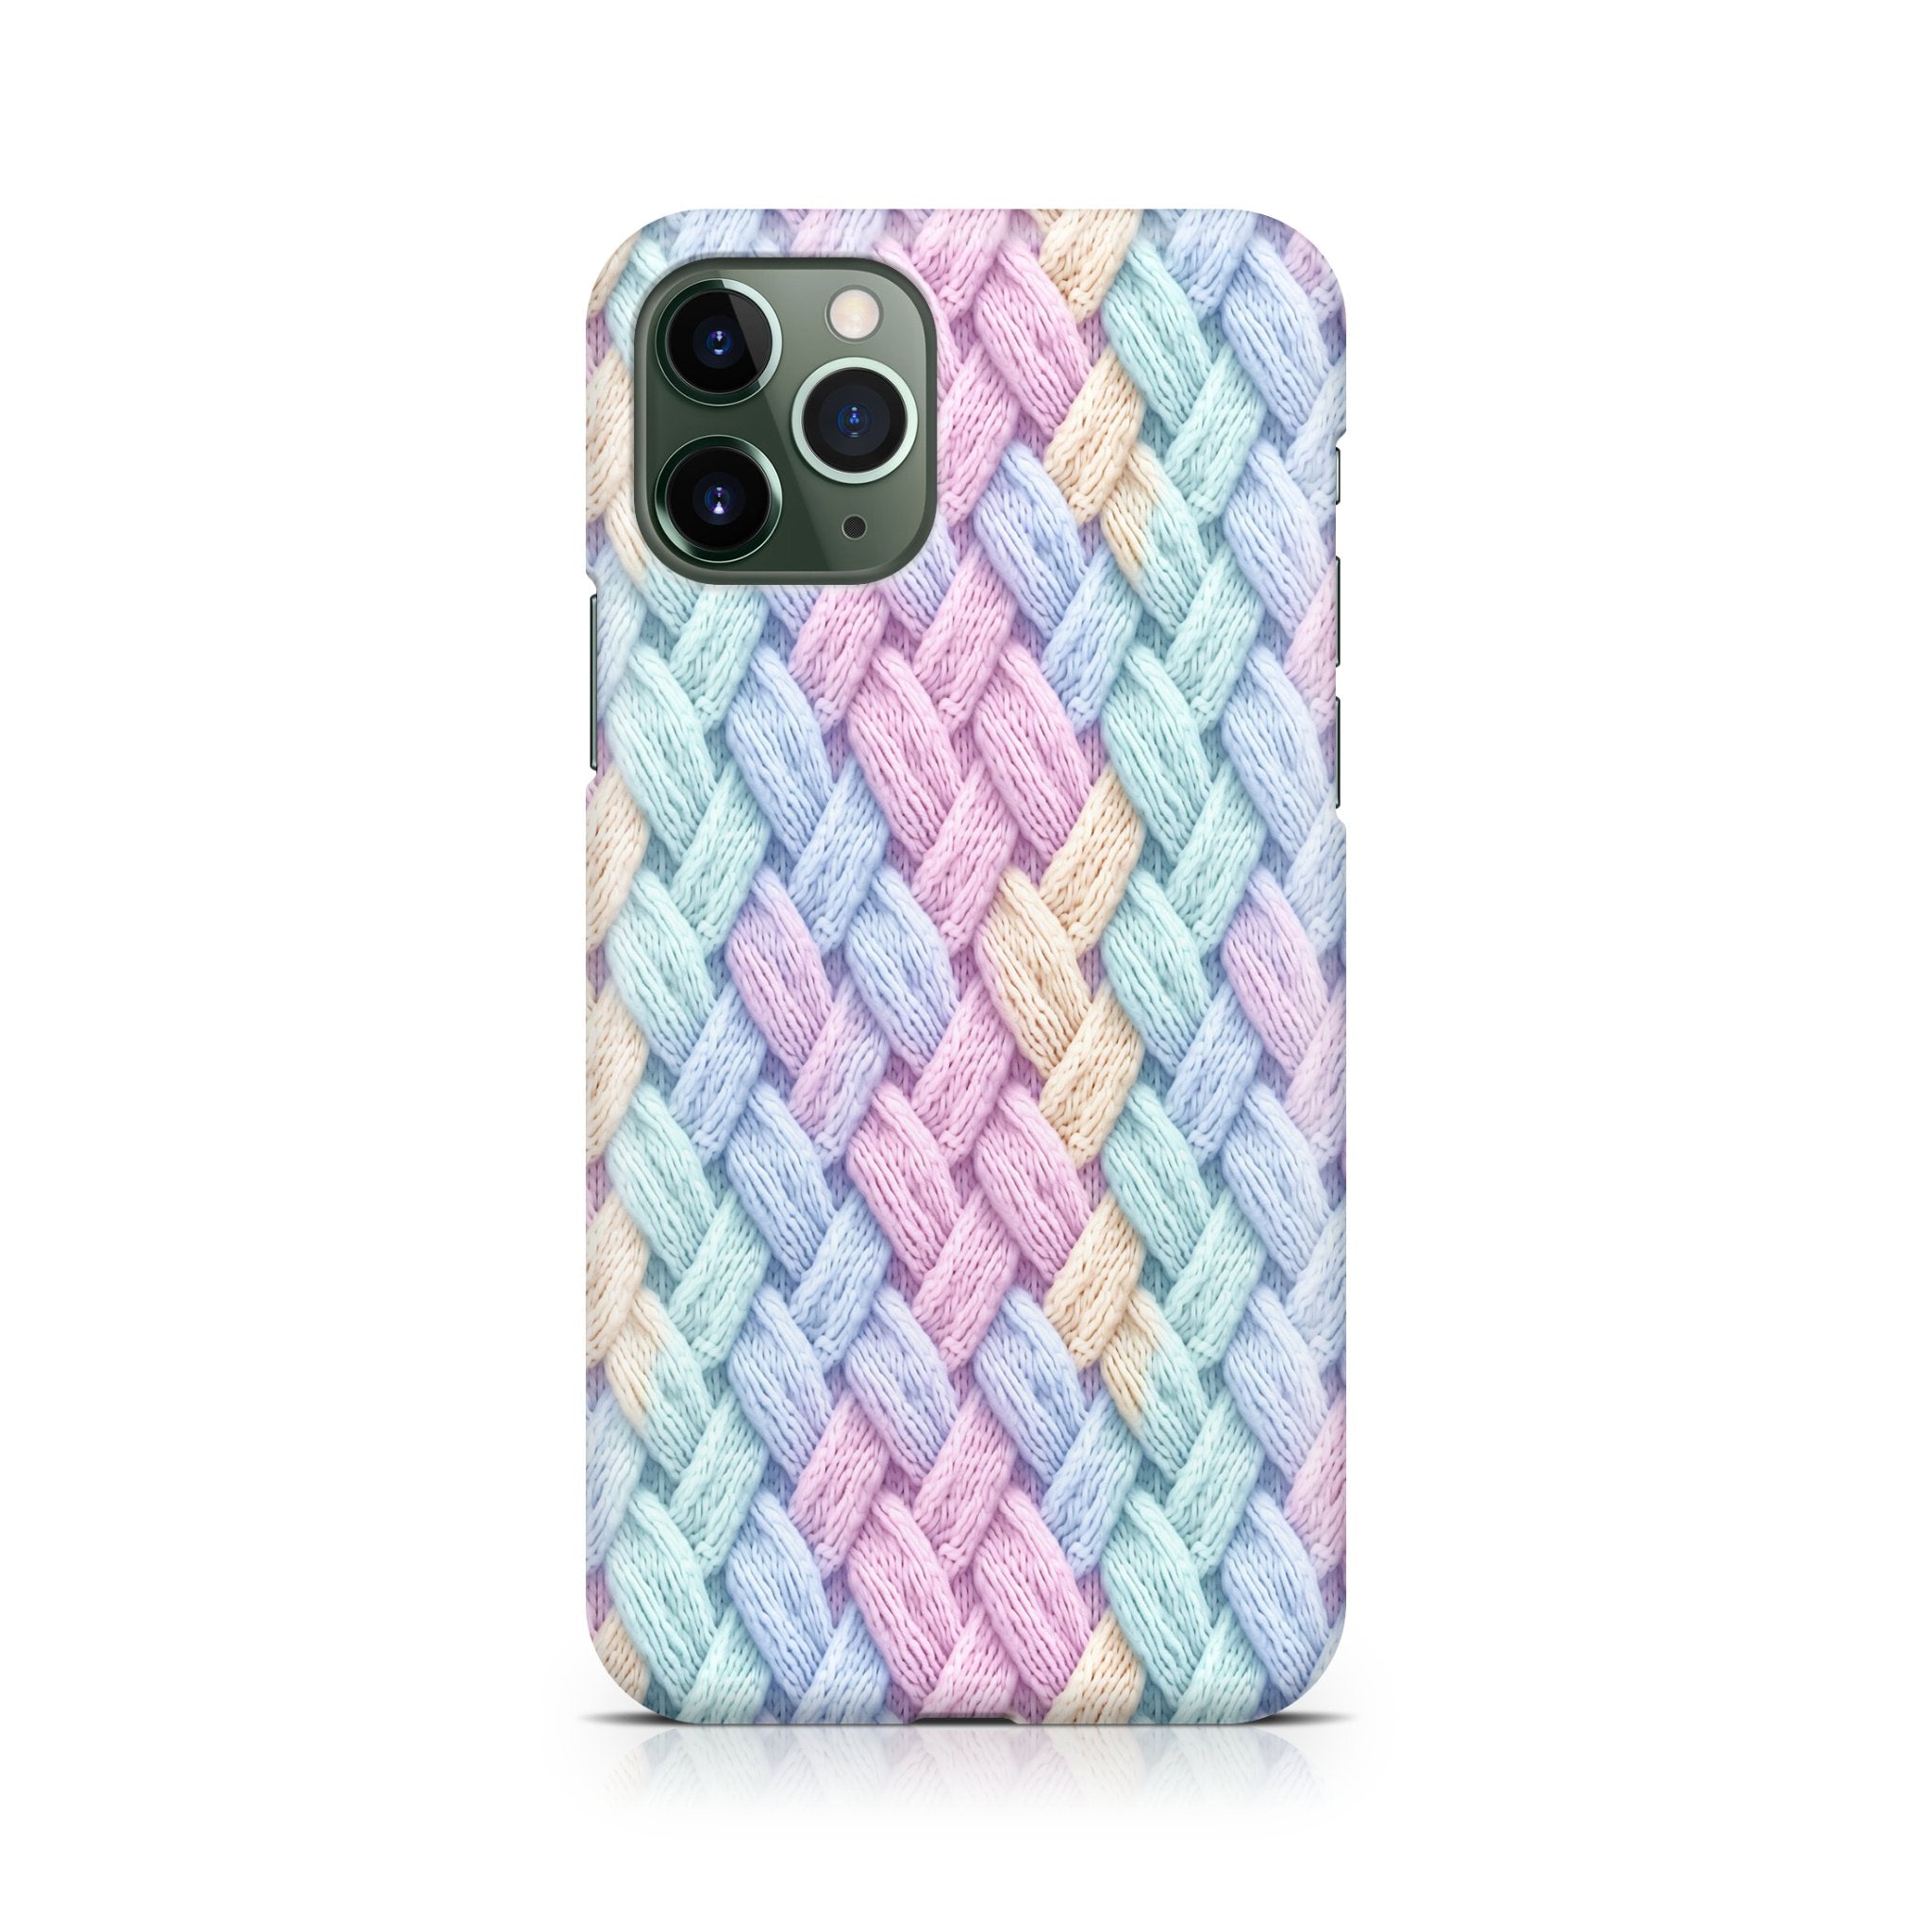 Whimsical Threads - iPhone phone case designs by CaseSwagger